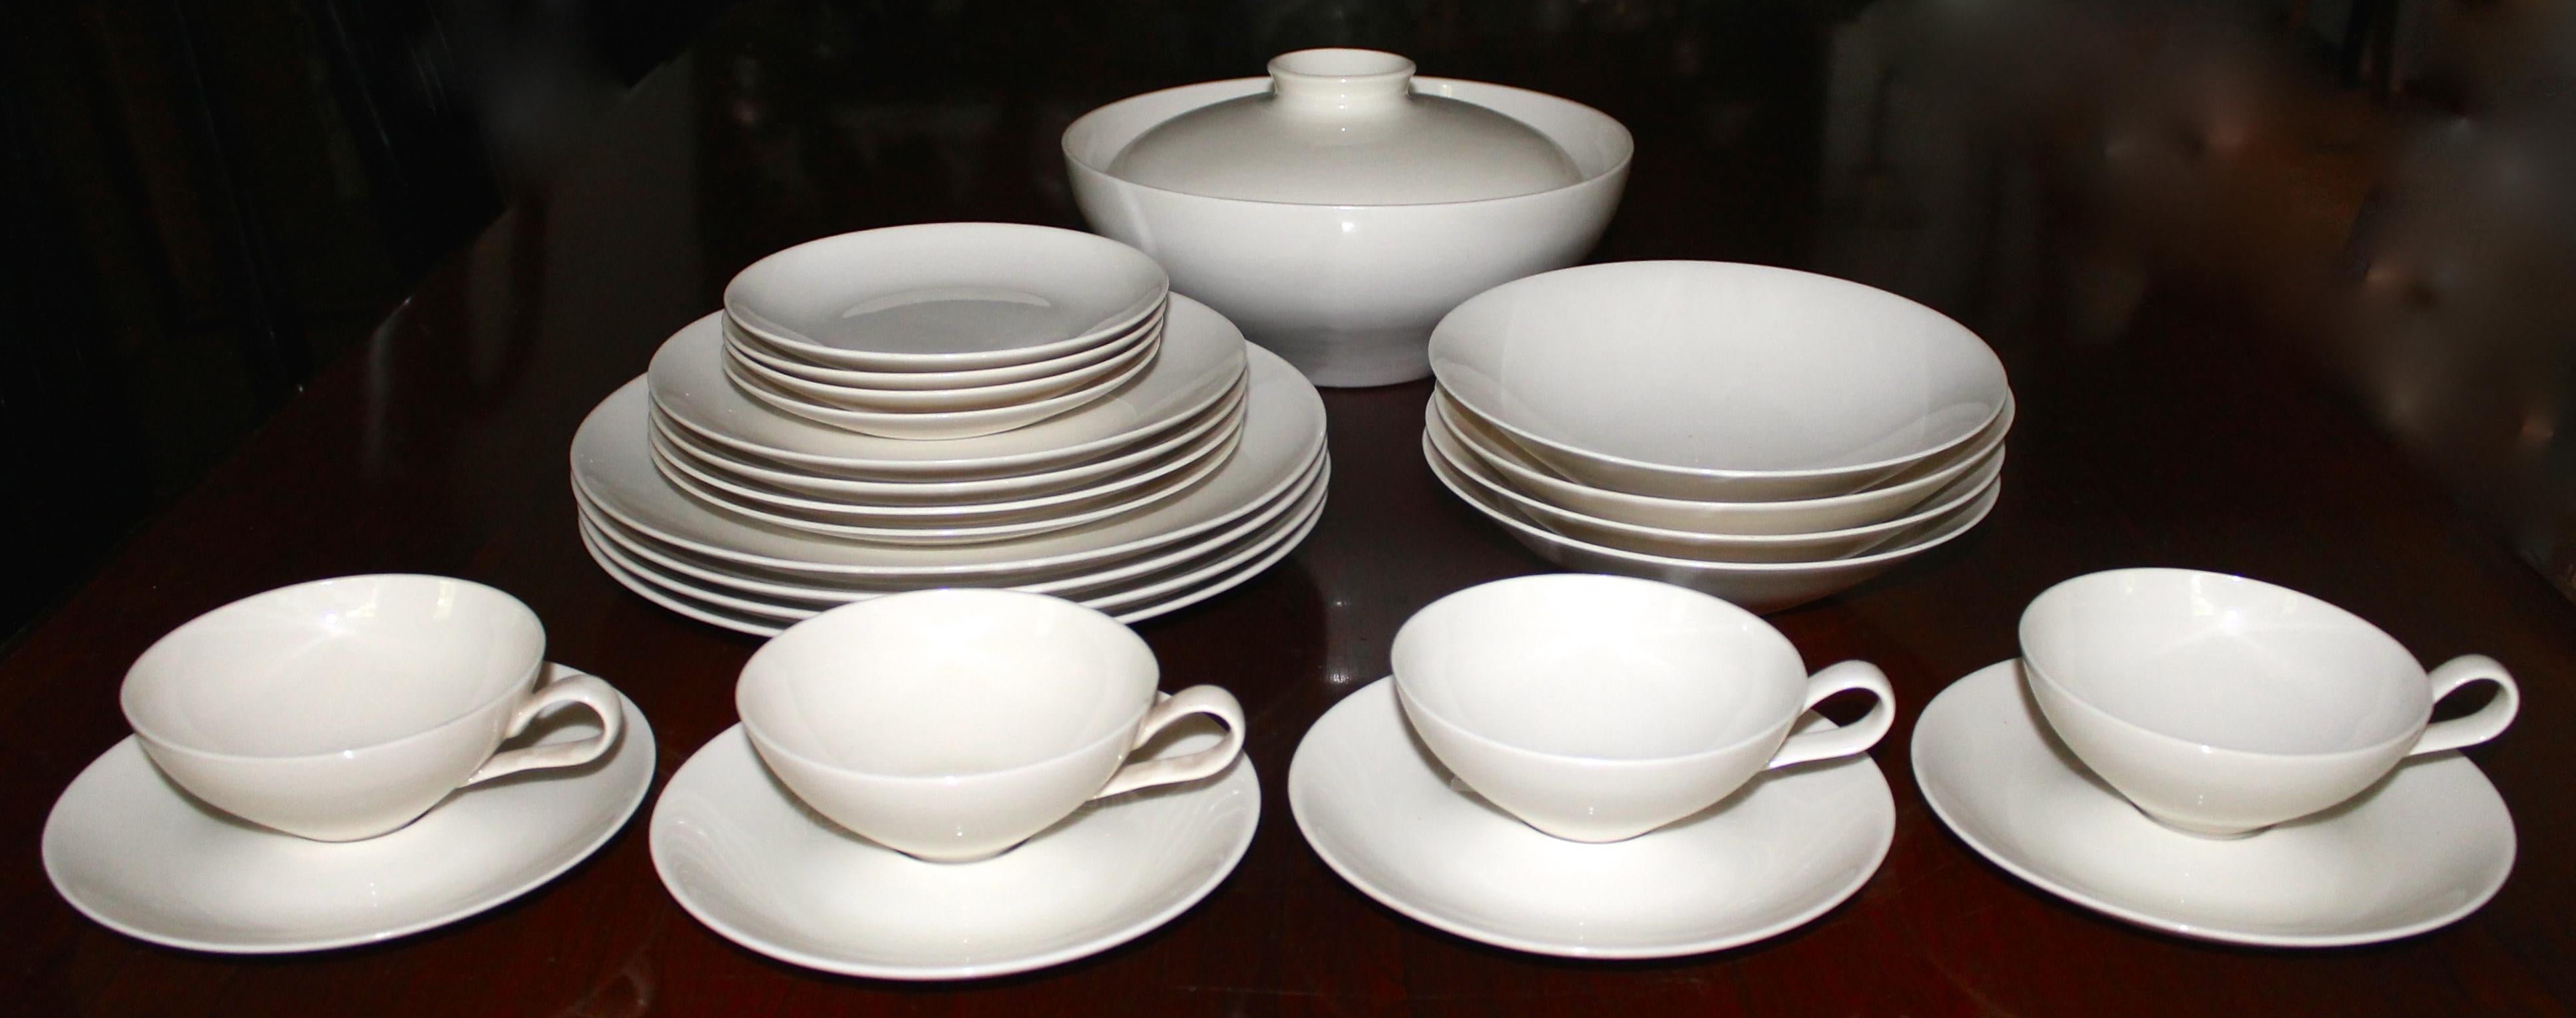 The set consists of 25 pieces: Four cups and four saucers 6 5/8